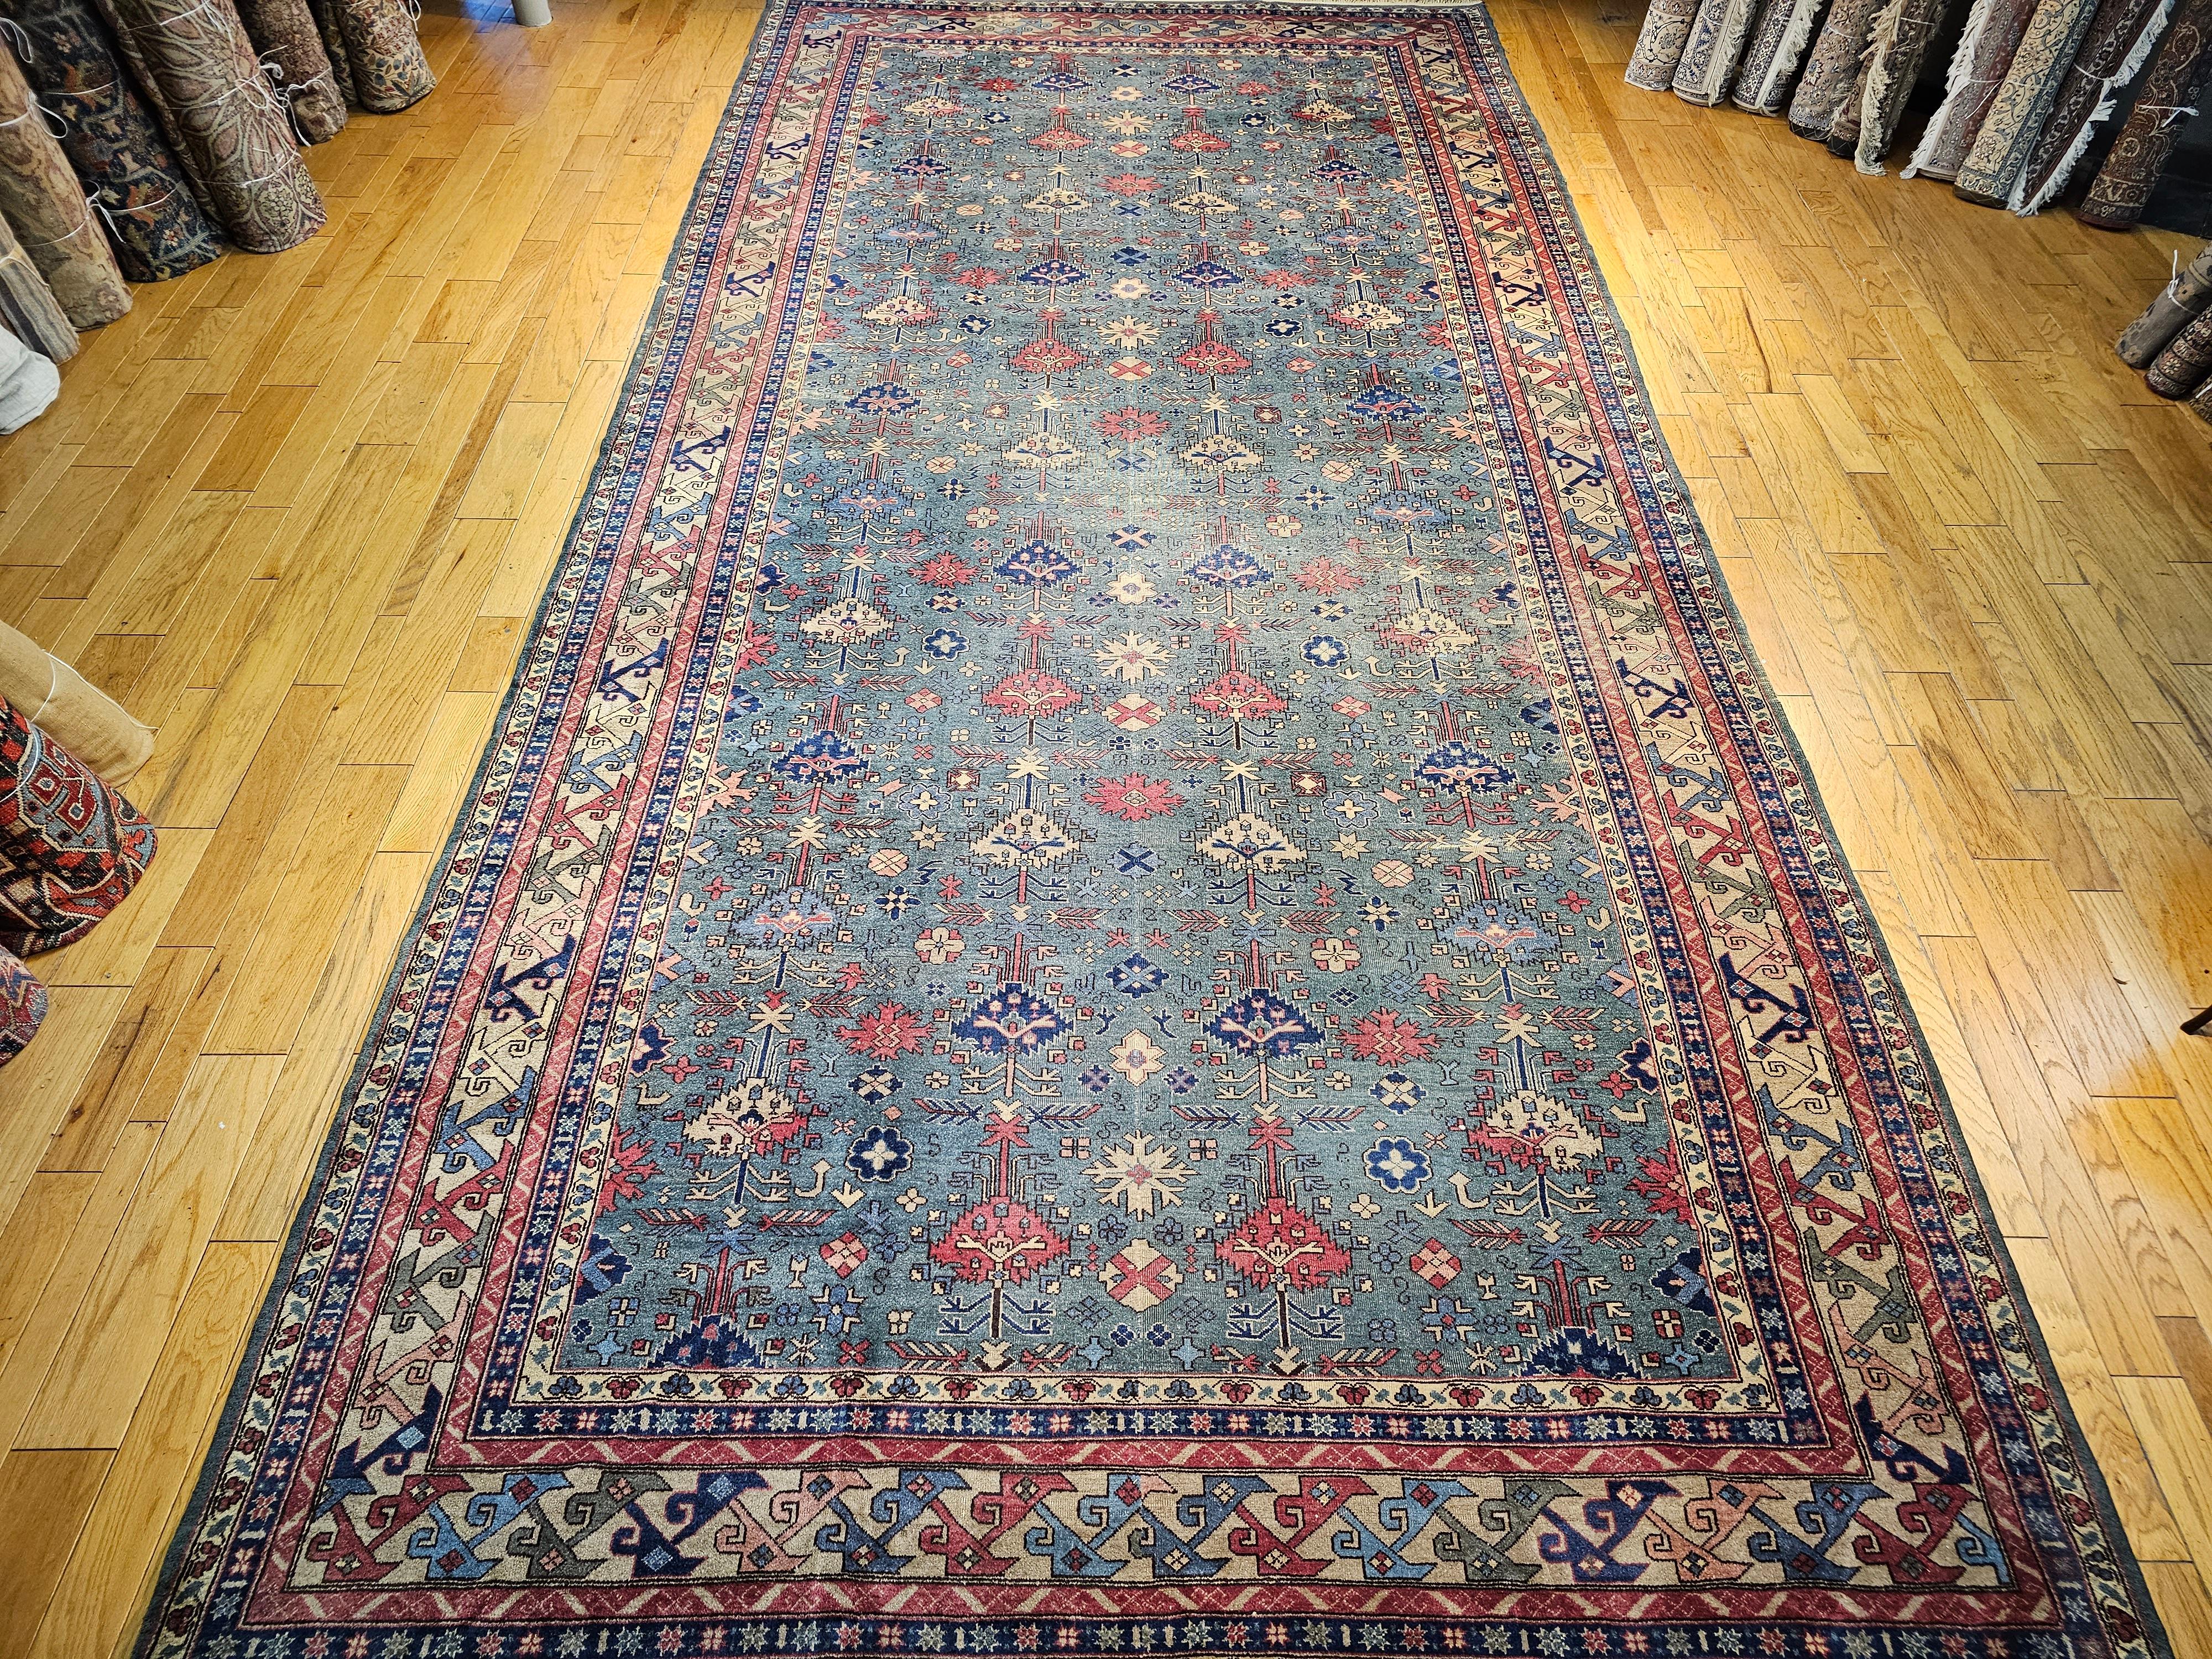 The Turkish Kazak design rug has an all-over geometric pattern that was hand-knotted in the manner of the rugs from the Caucasus in the early 1900s.  The field has a beautiful pale teal color with geometric design shapes in red, green, blue, ivory,